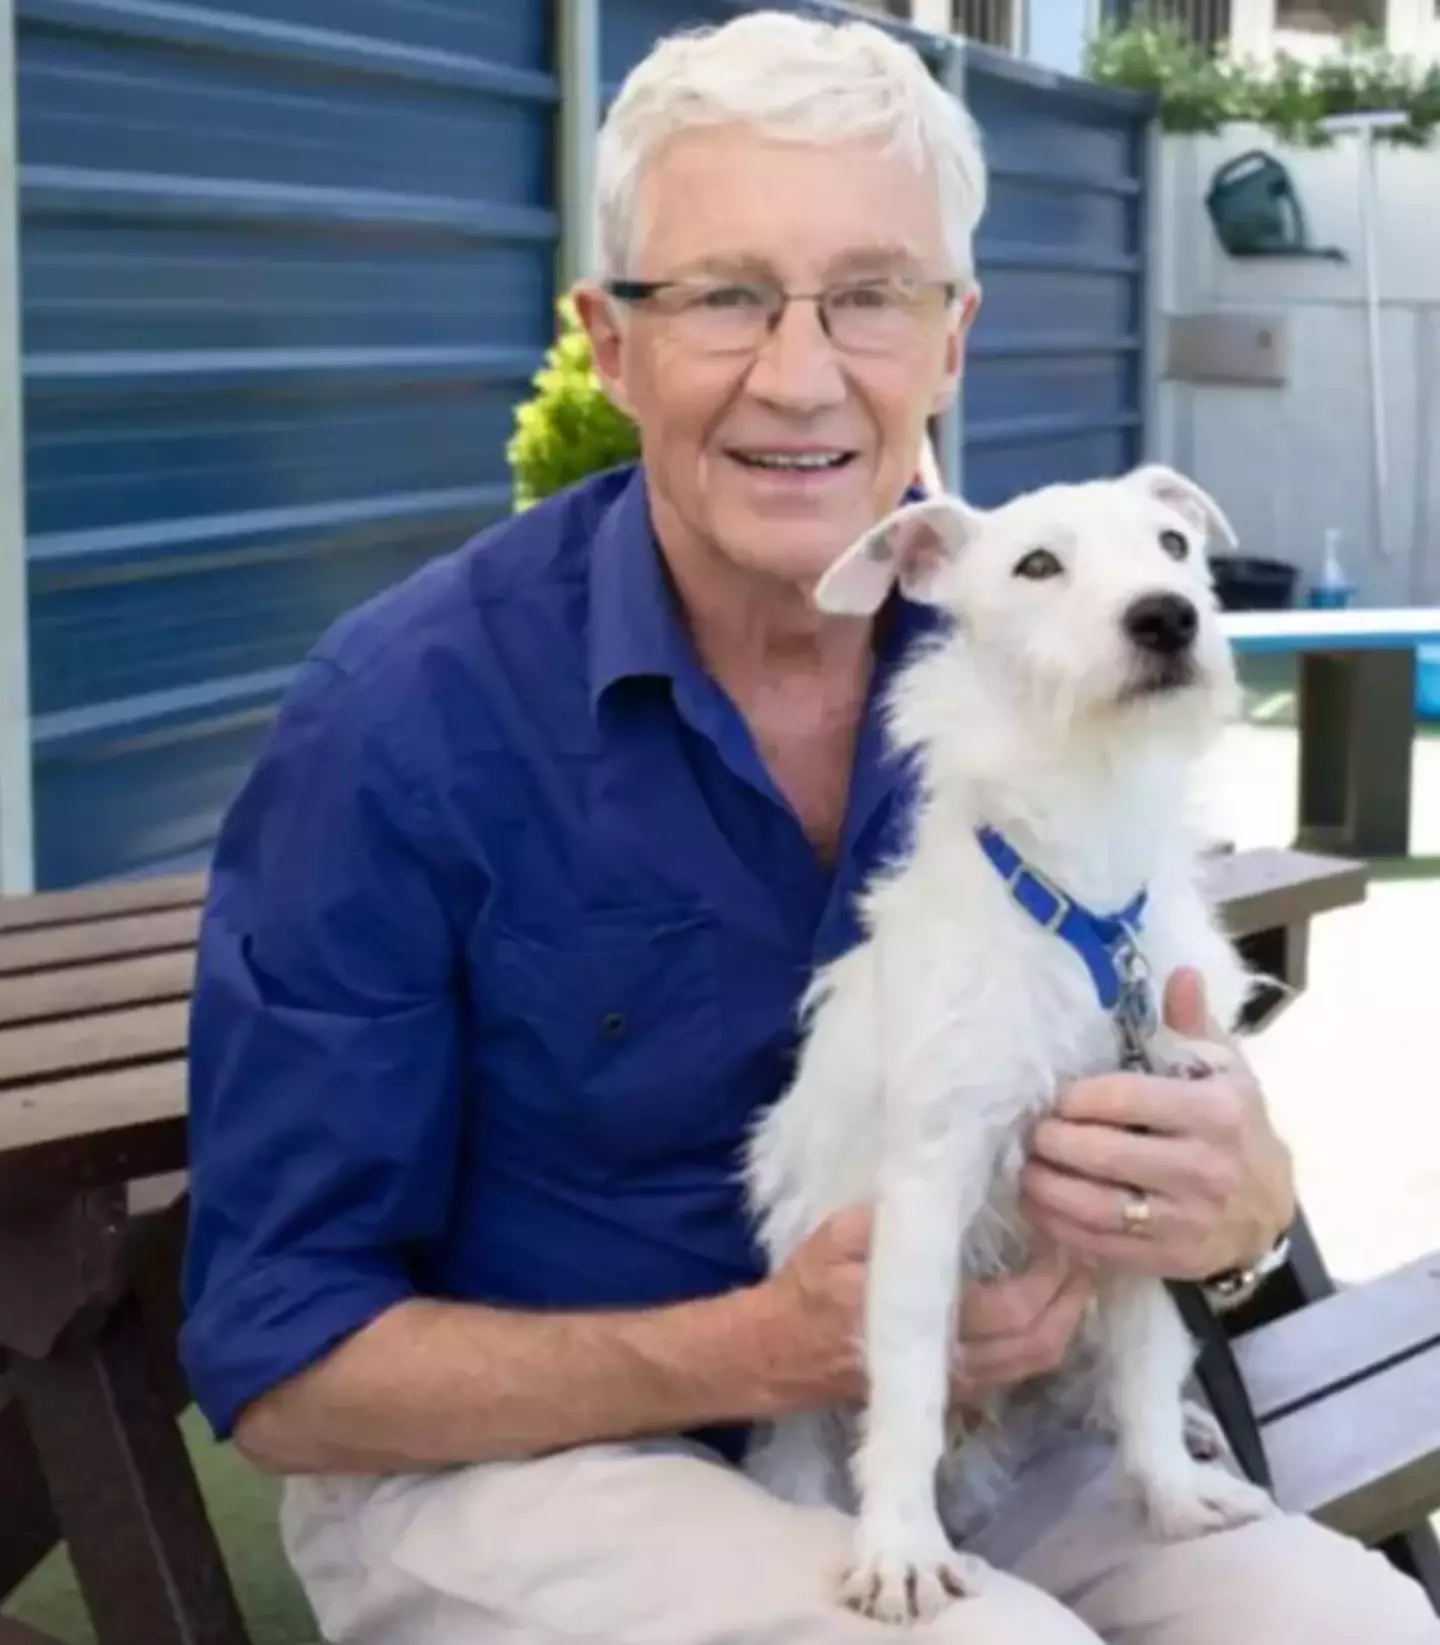 The news follows the sad passing of much-loved presenter Paul O’Grady last spring.